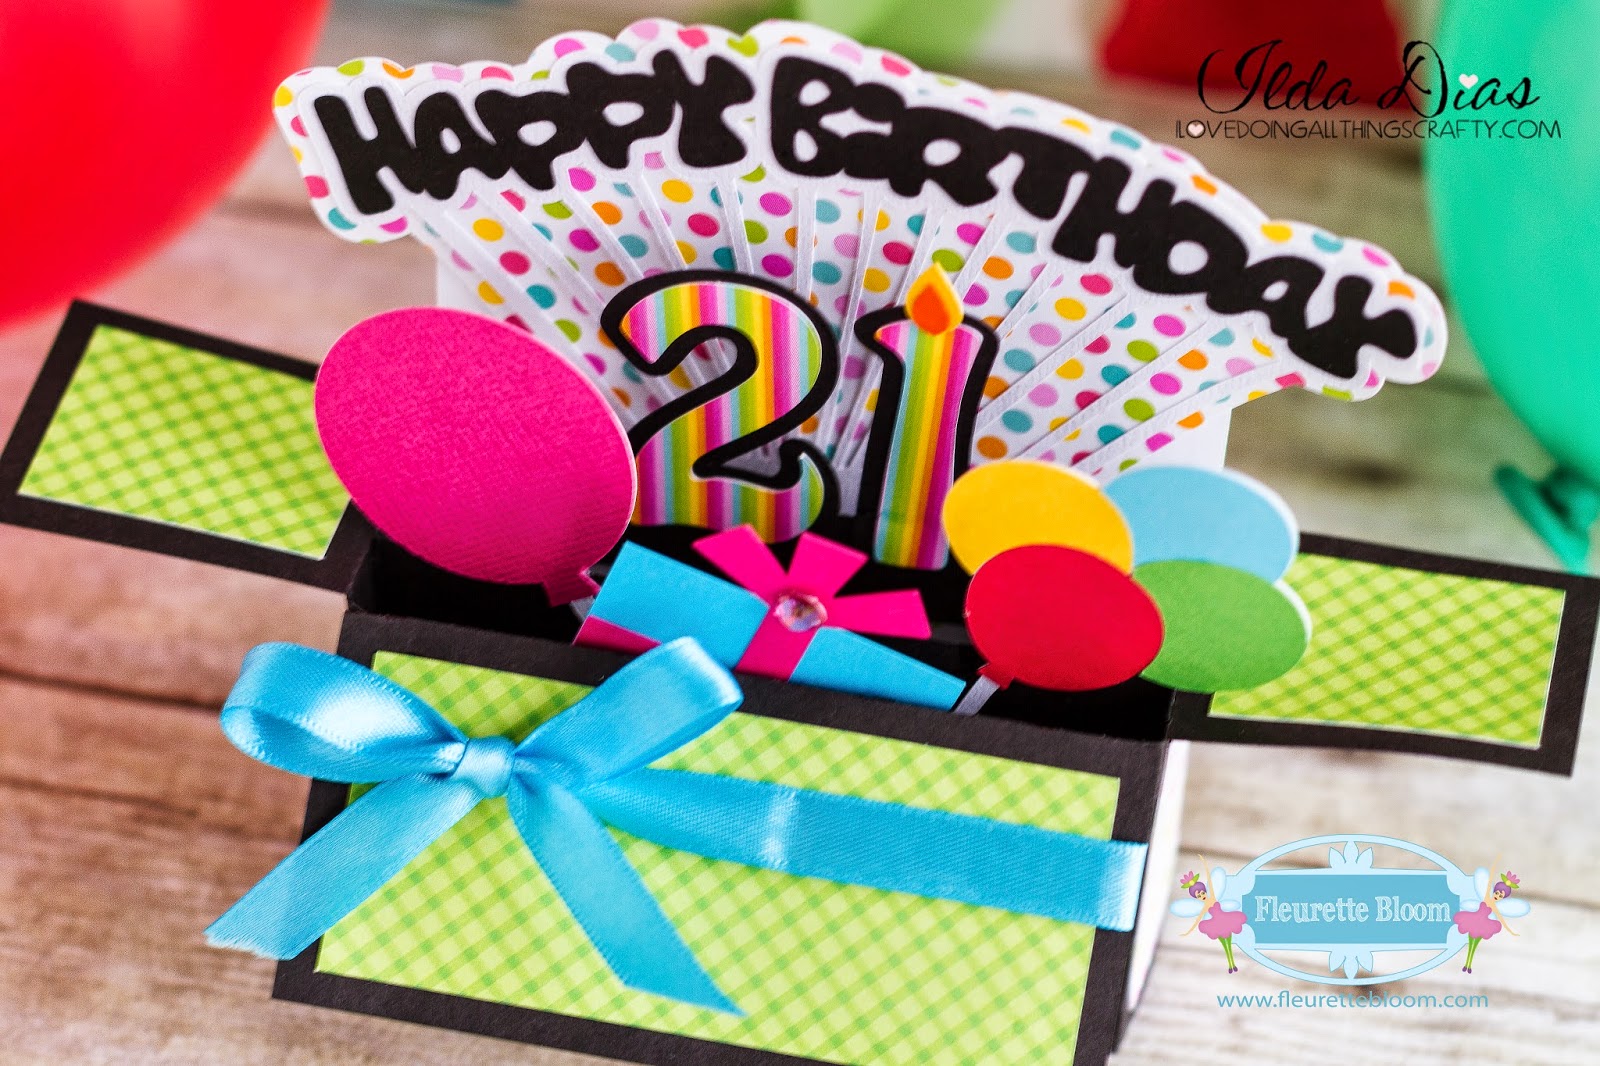 Download I Love Doing All Things Crafty 21st Birthday Box Card SVG, PNG, EPS, DXF File